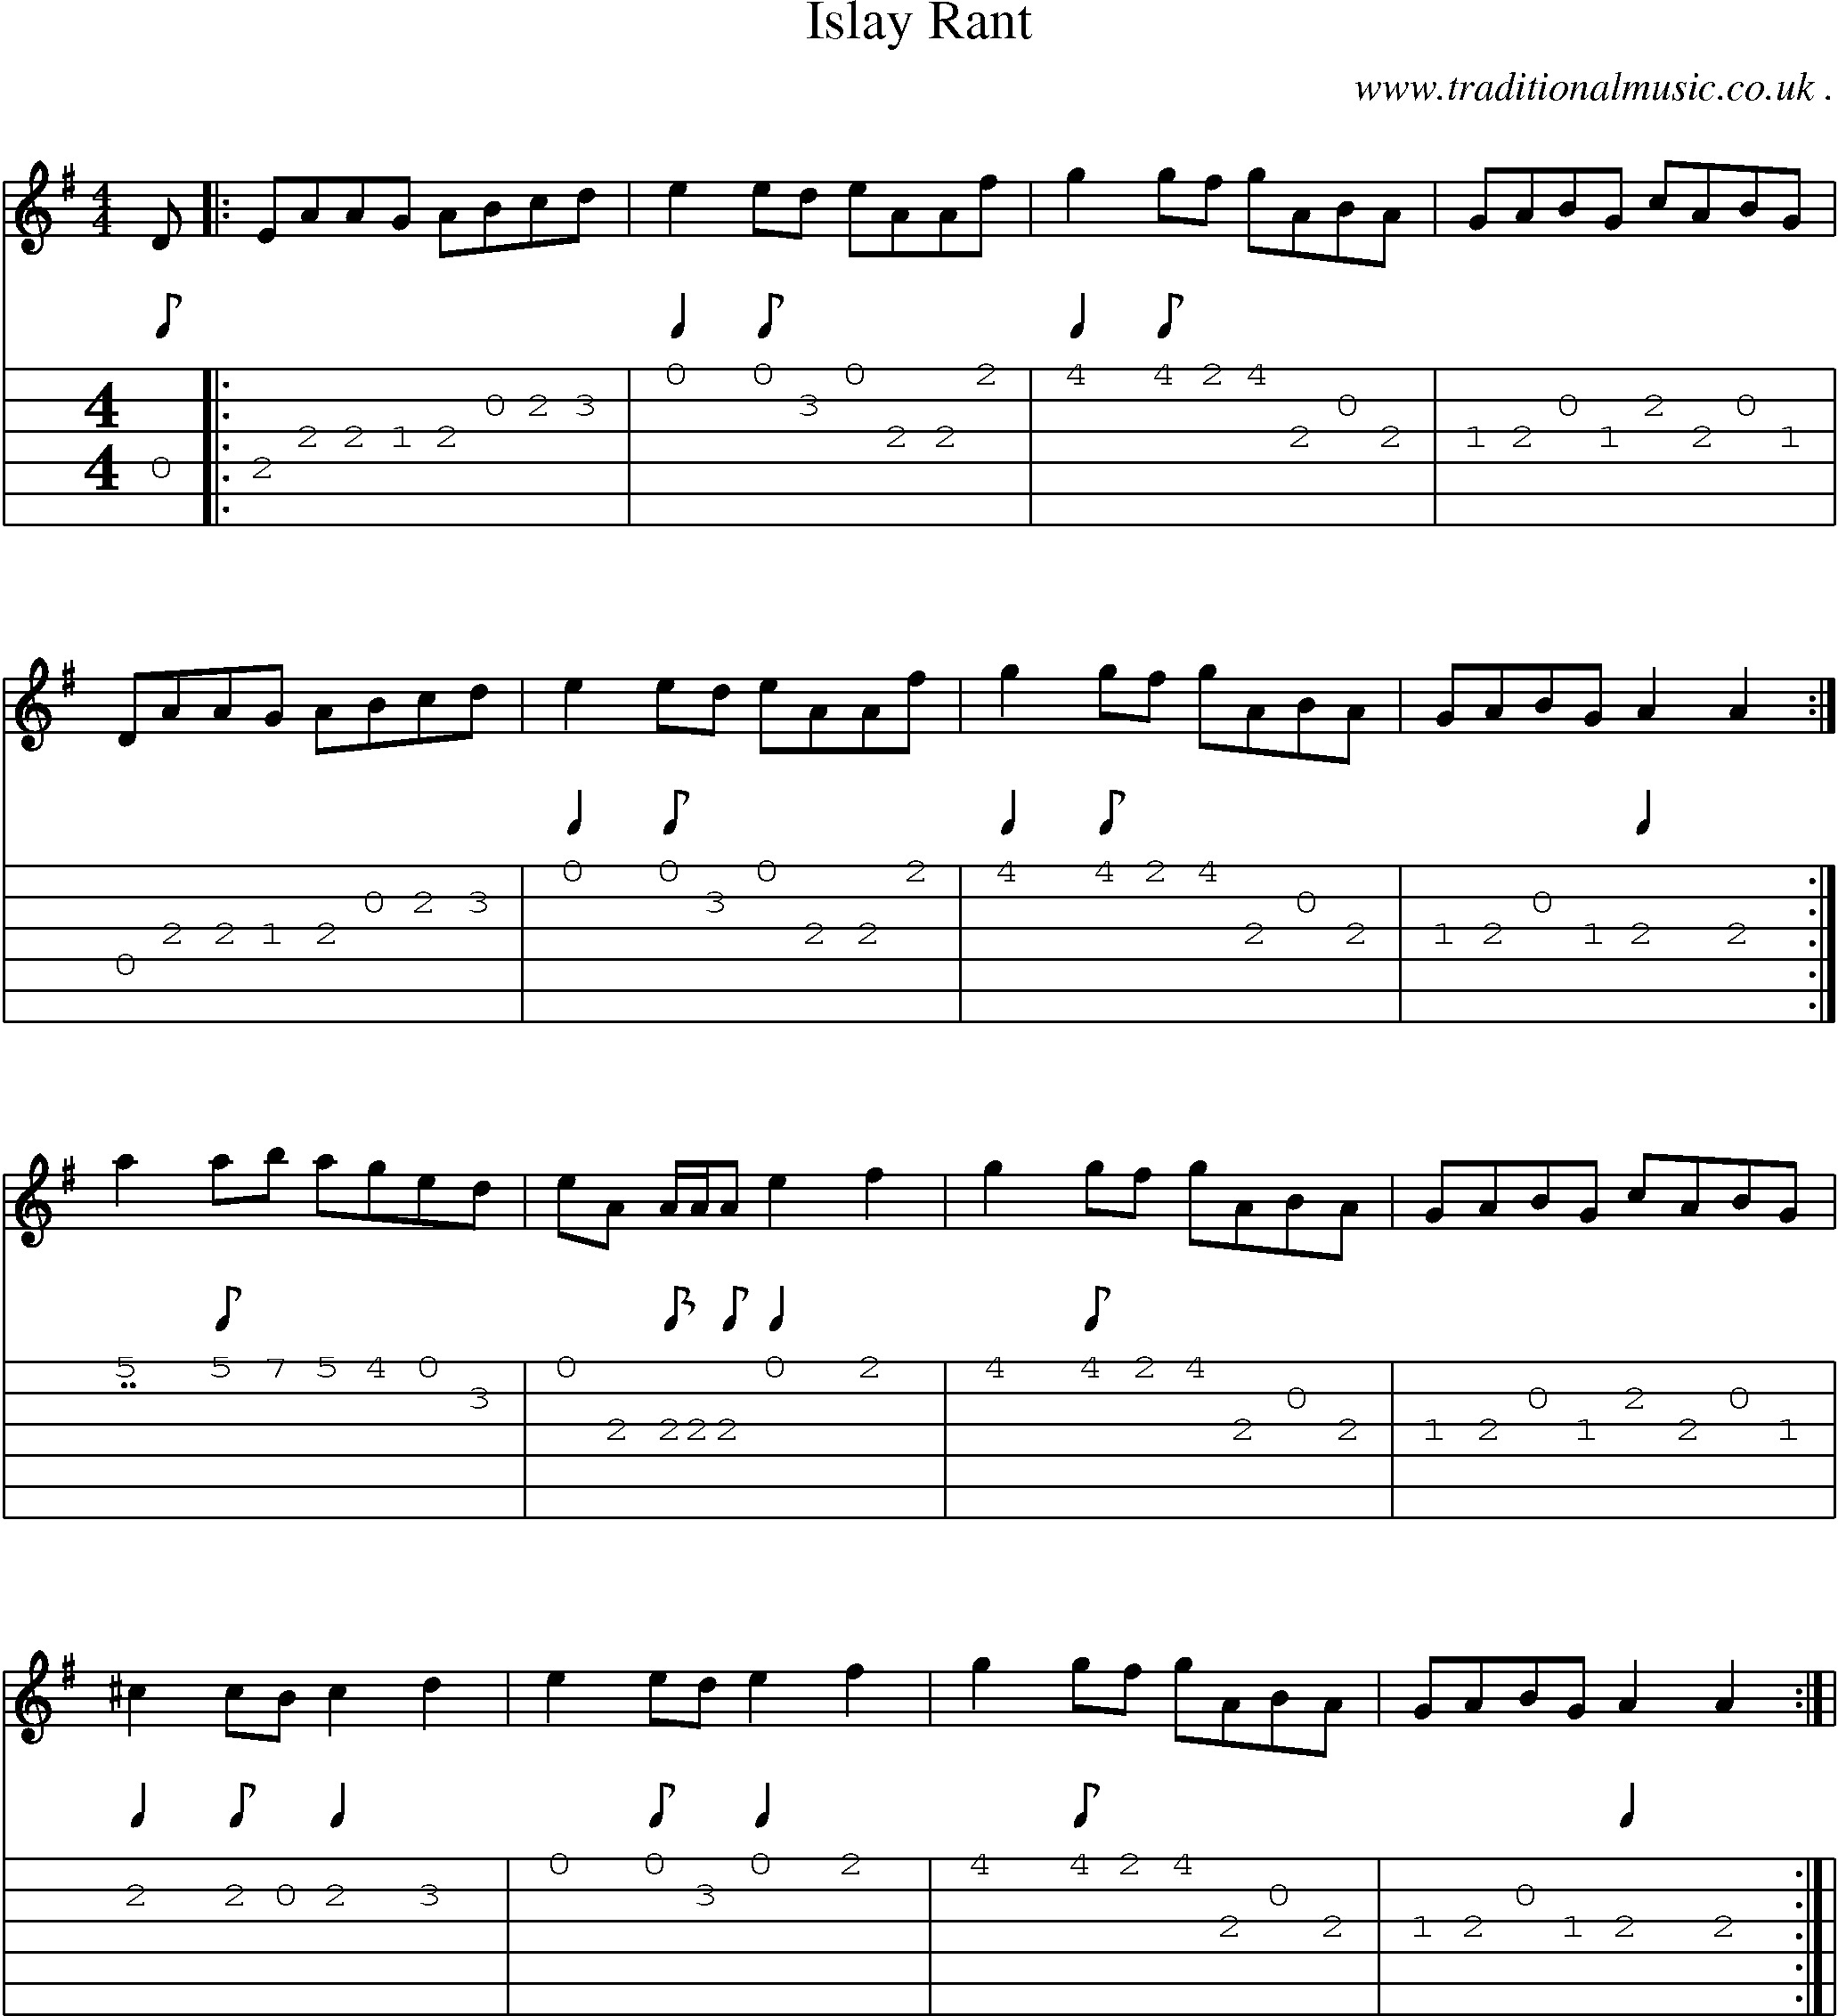 Sheet-Music and Guitar Tabs for Islay Rant